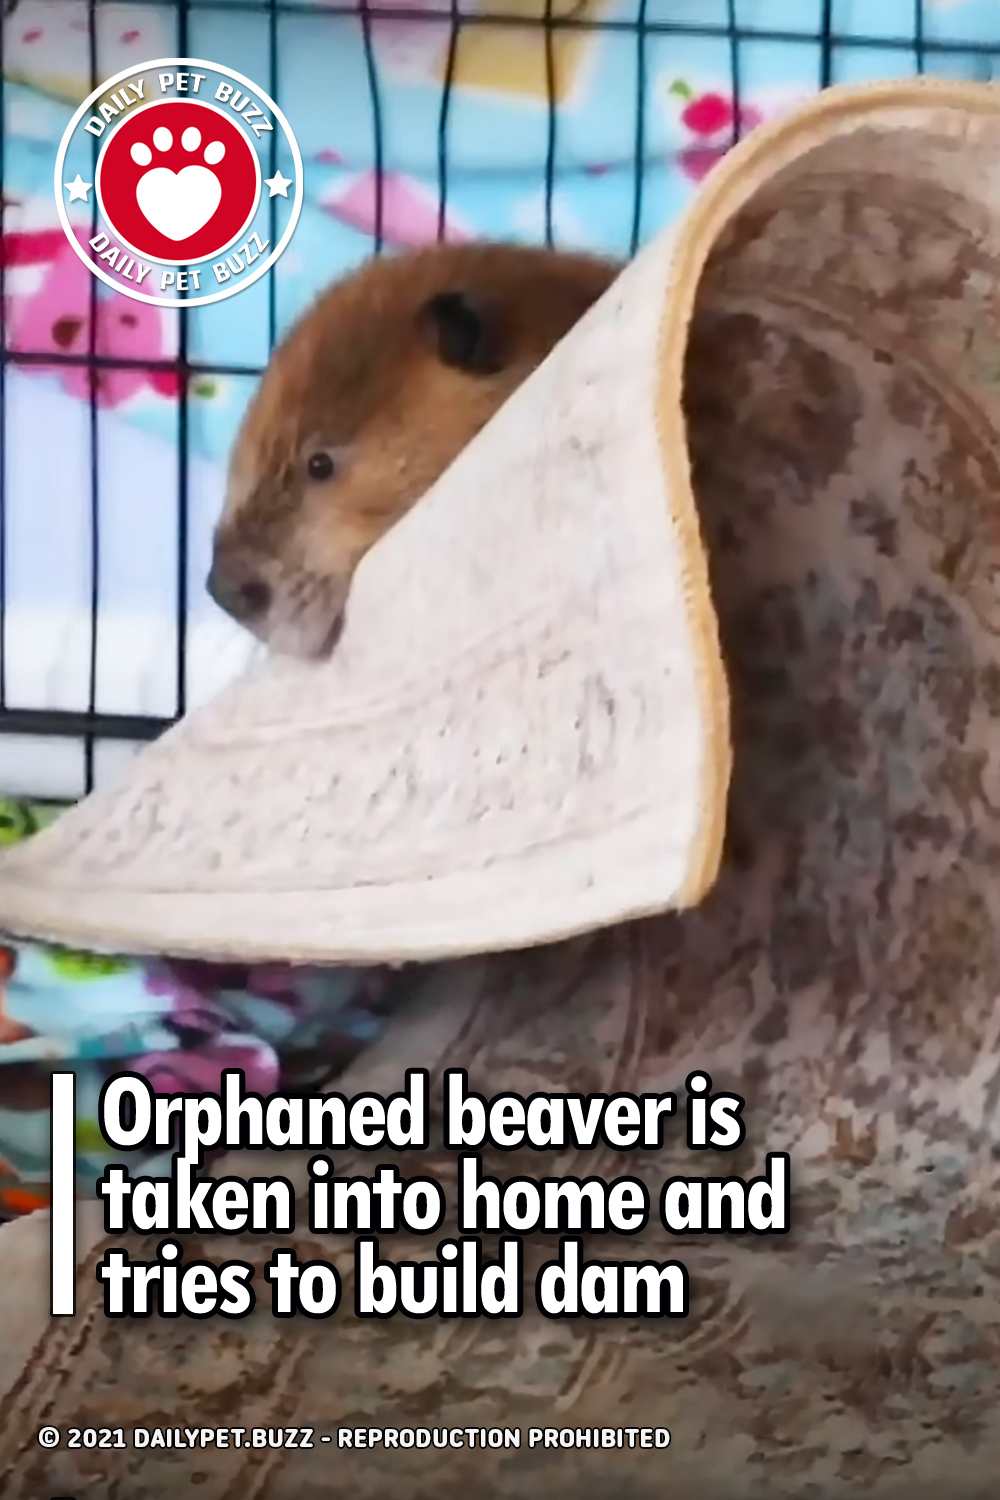 Orphaned beaver is taken into home and tries to build dam